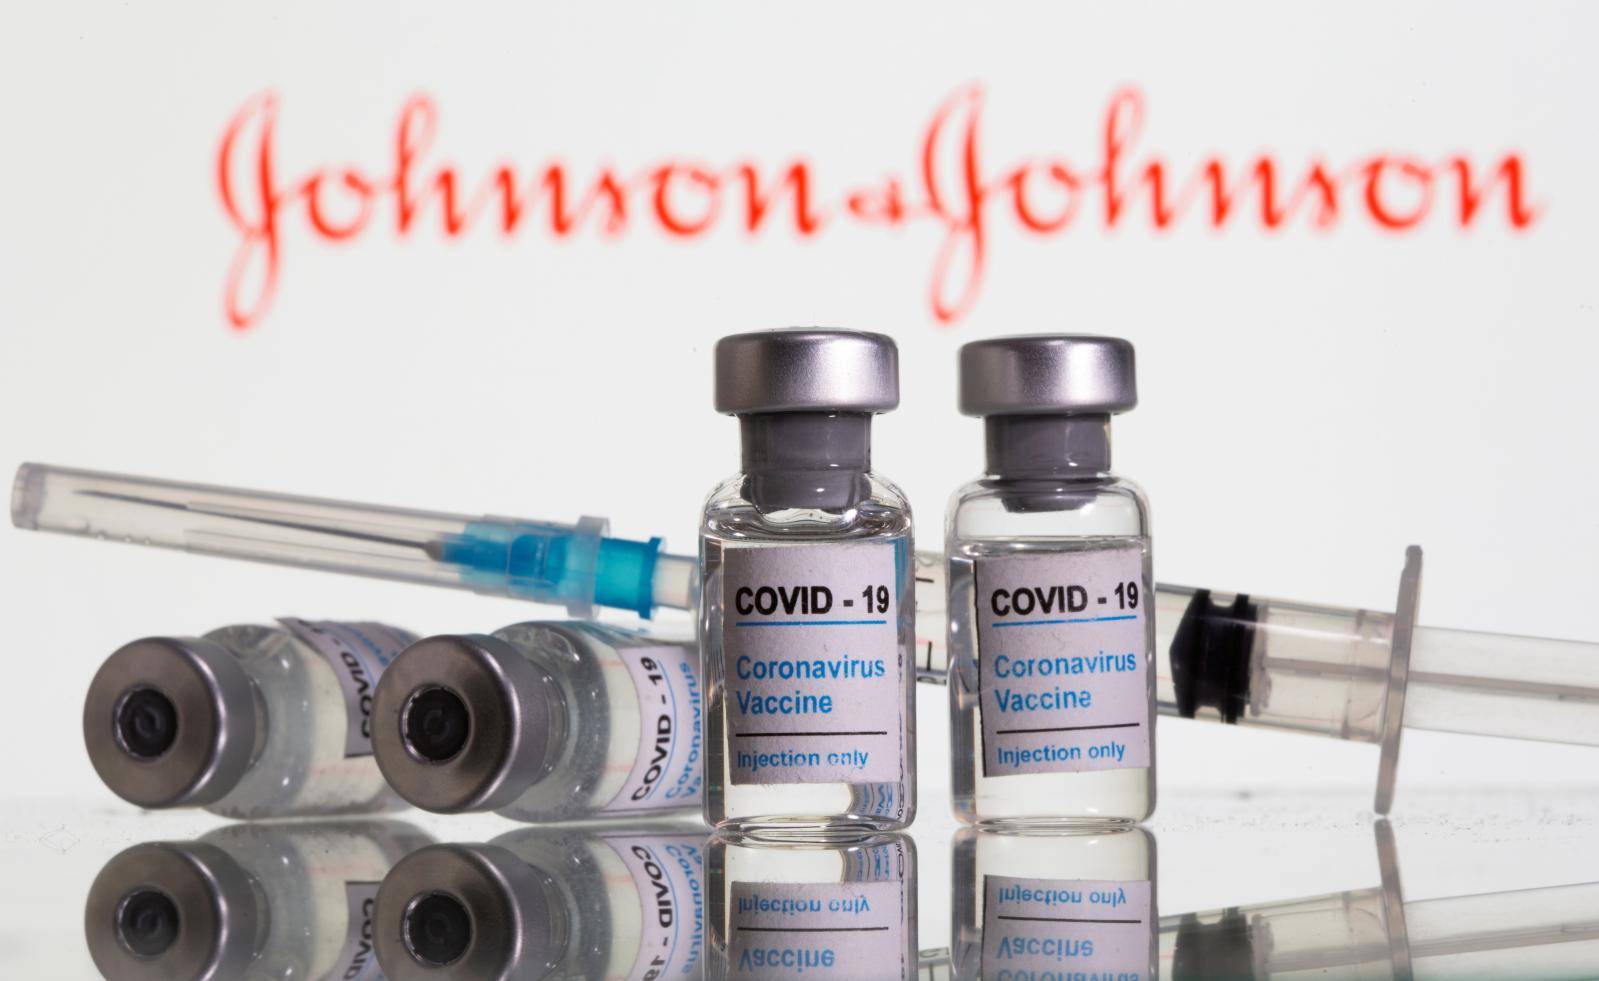 FILE PHOTO: FILE PHOTO: Vials labelled "COVID-19 Coronavirus Vaccine" and sryinge are seen in front of displayed J&J logo in this illustration